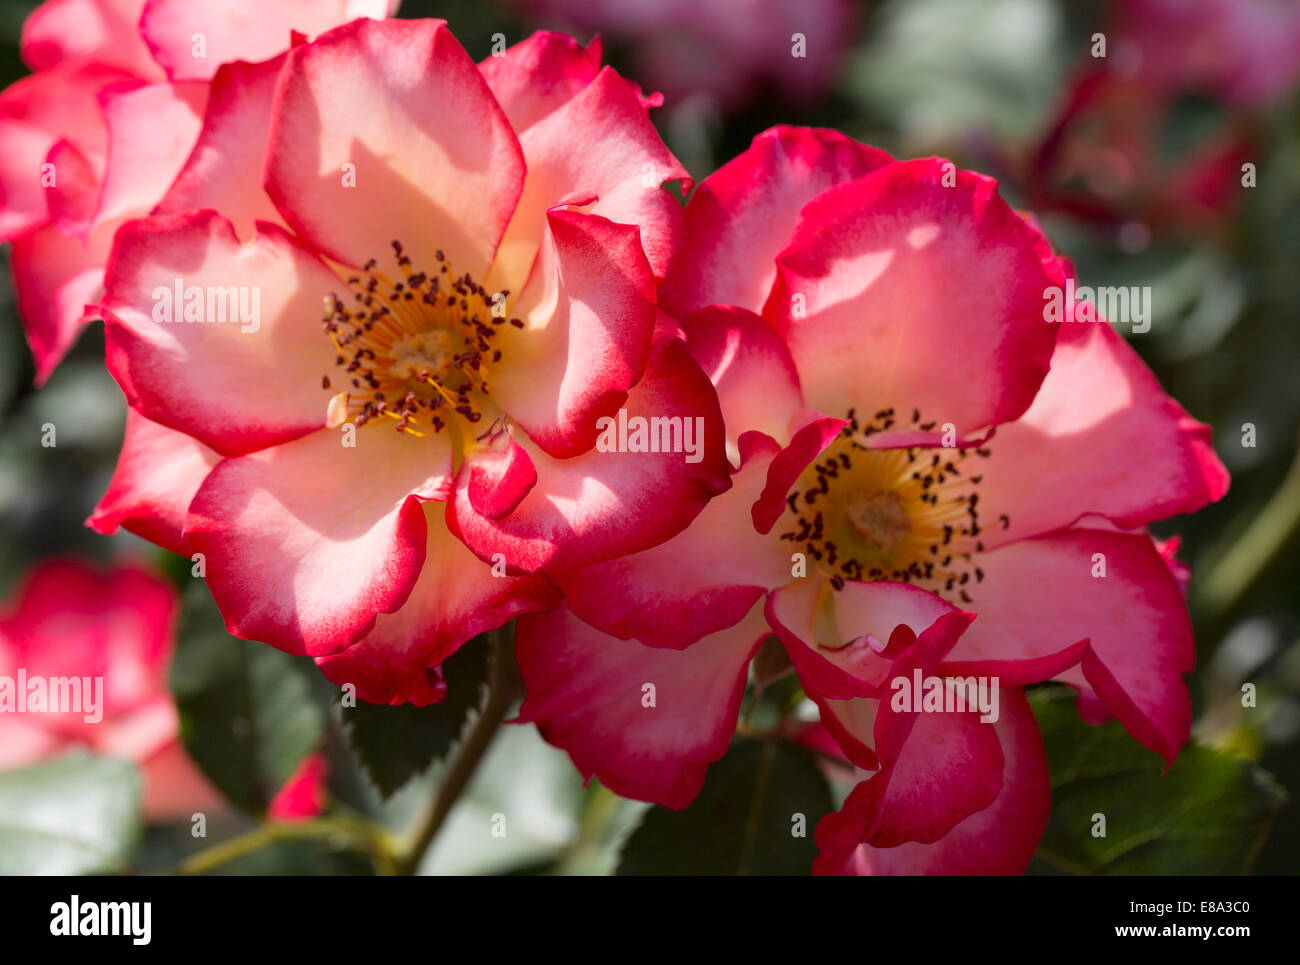 Cluster flowered rose Betty Boop. Vibrant and pretty ivory blooms with brilliant red edges and golden centers. Stock Photo